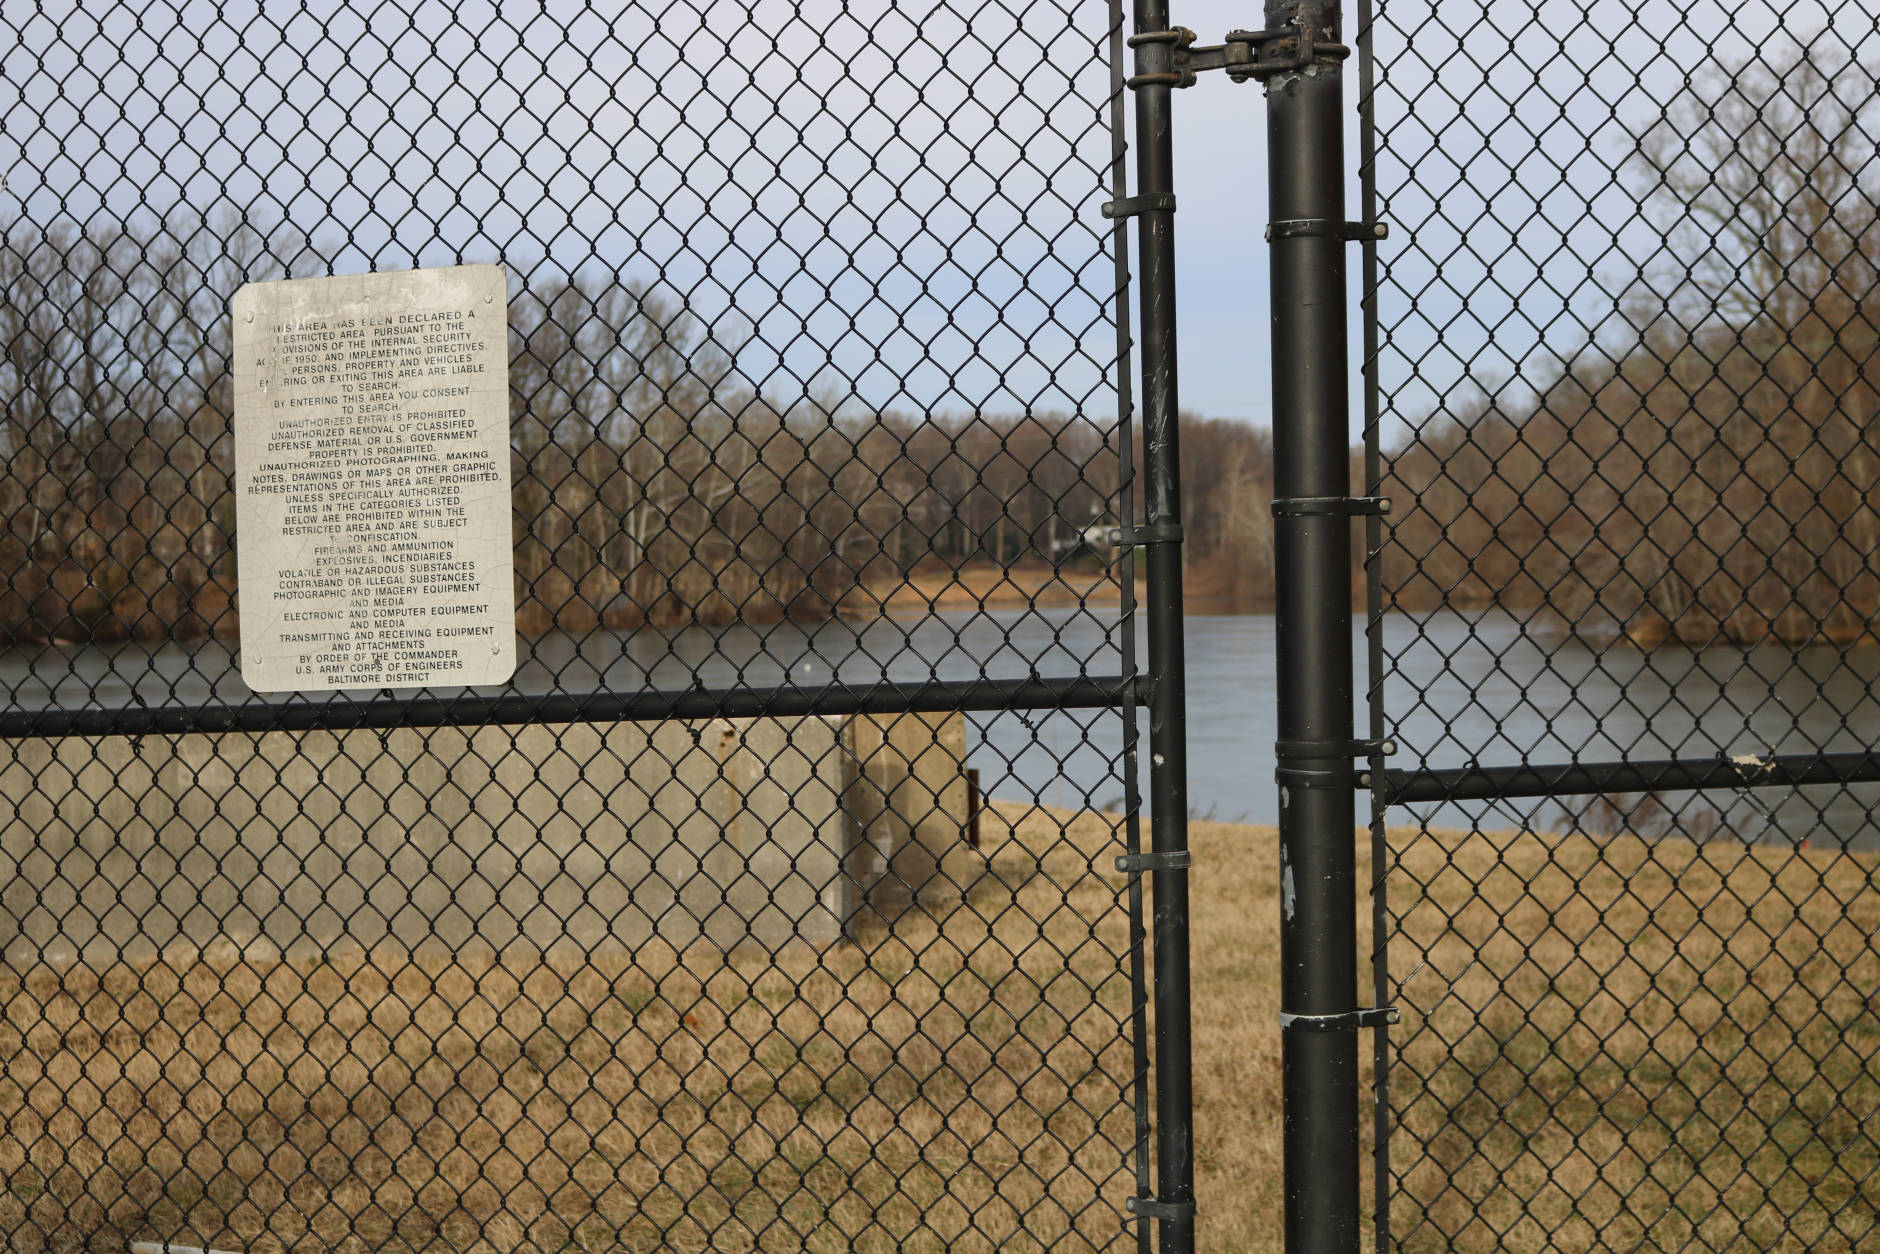 Local water officials are finally making public a longstanding water system shortcoming  — Washington, D.C. has no backup drinking water supply. (WTOP/Hanna Choi)